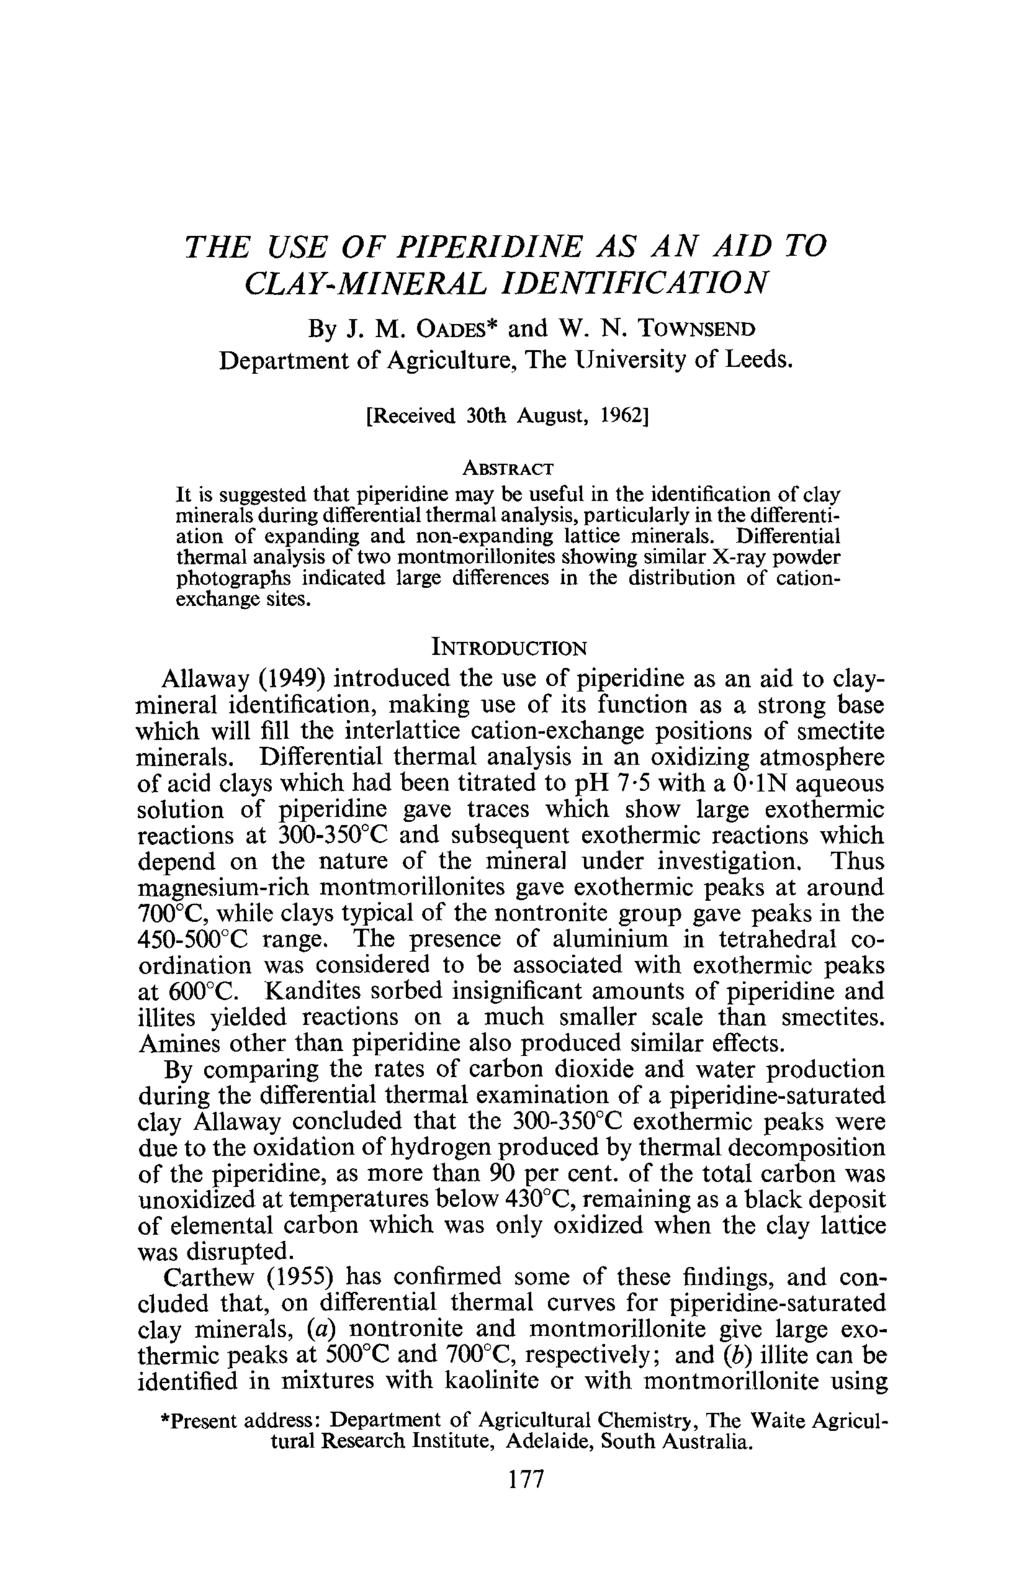 THE USE OF PIPERIDINE AS AN AID TO CLAY-MINERAL IDENTIFICATION By J. M. OADES* and W. N. TOWNSEND Department of Agriculture, The University of Leeds.